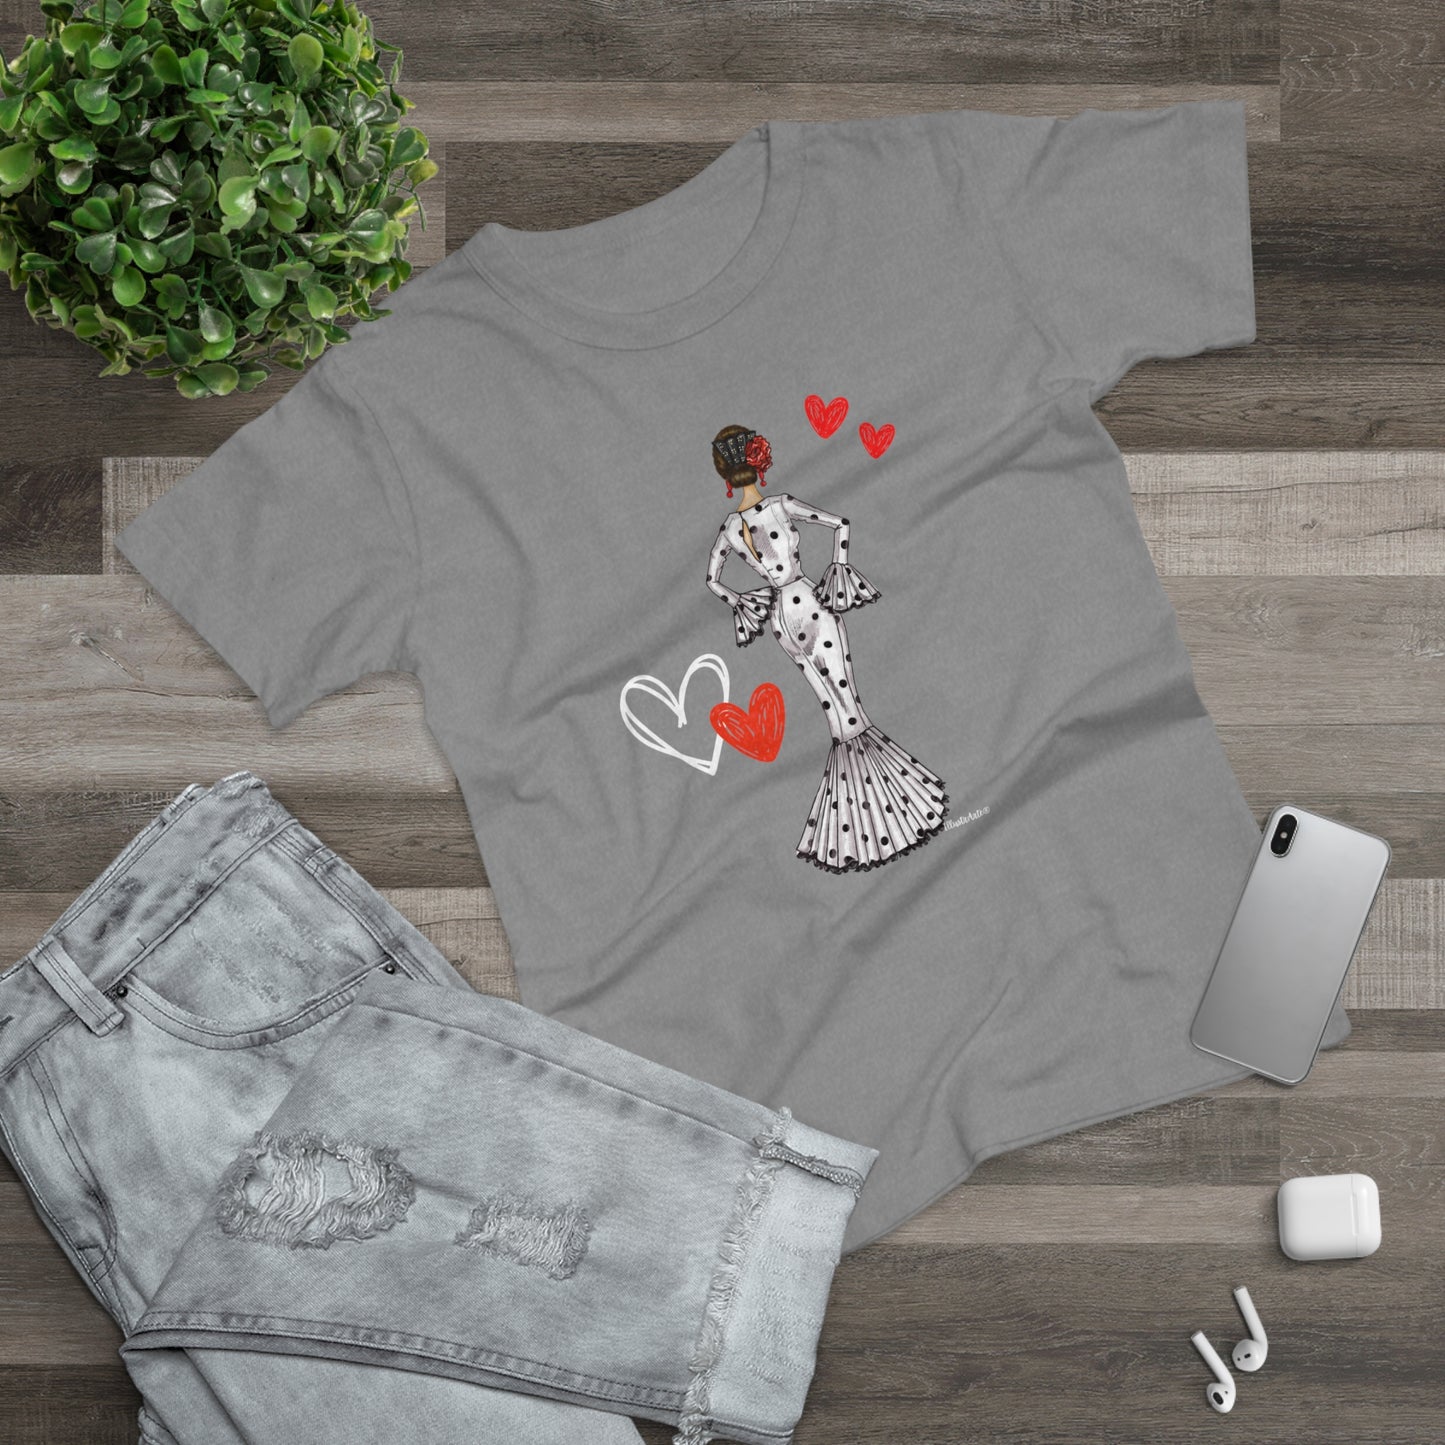 a t - shirt with a picture of a woman holding a heart